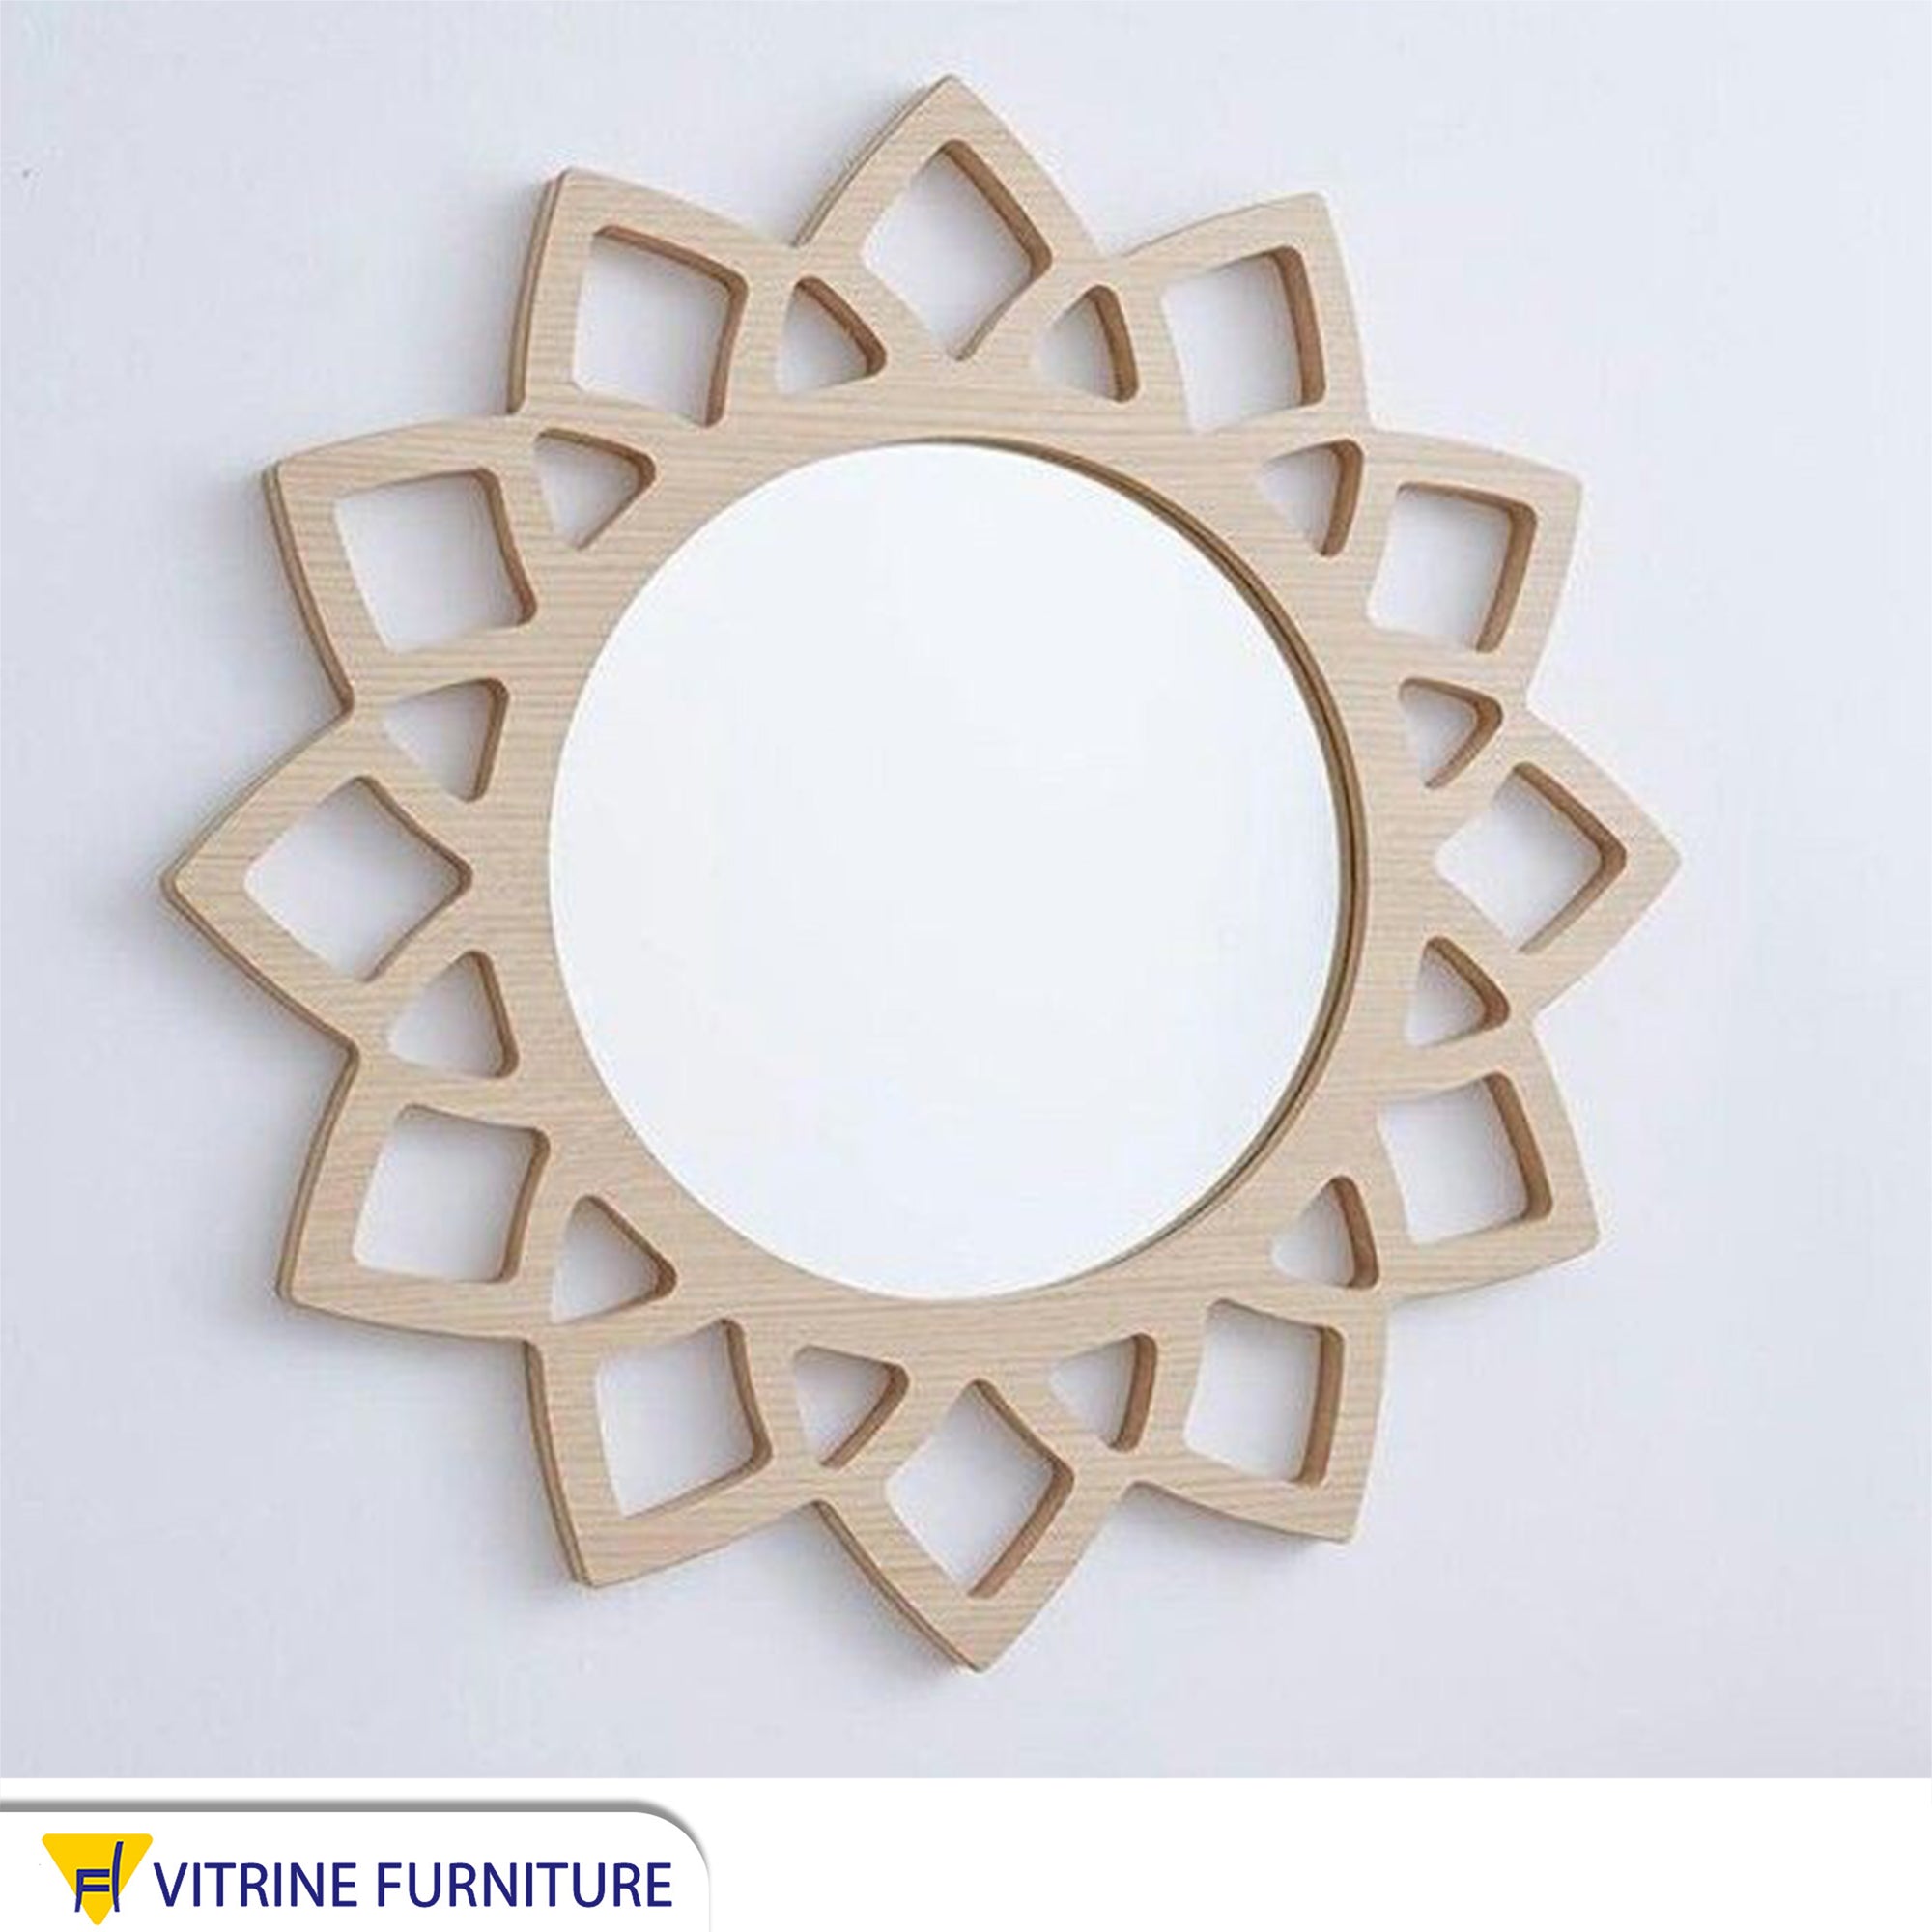 Mirror with a circular, hollowed-out wooden frame